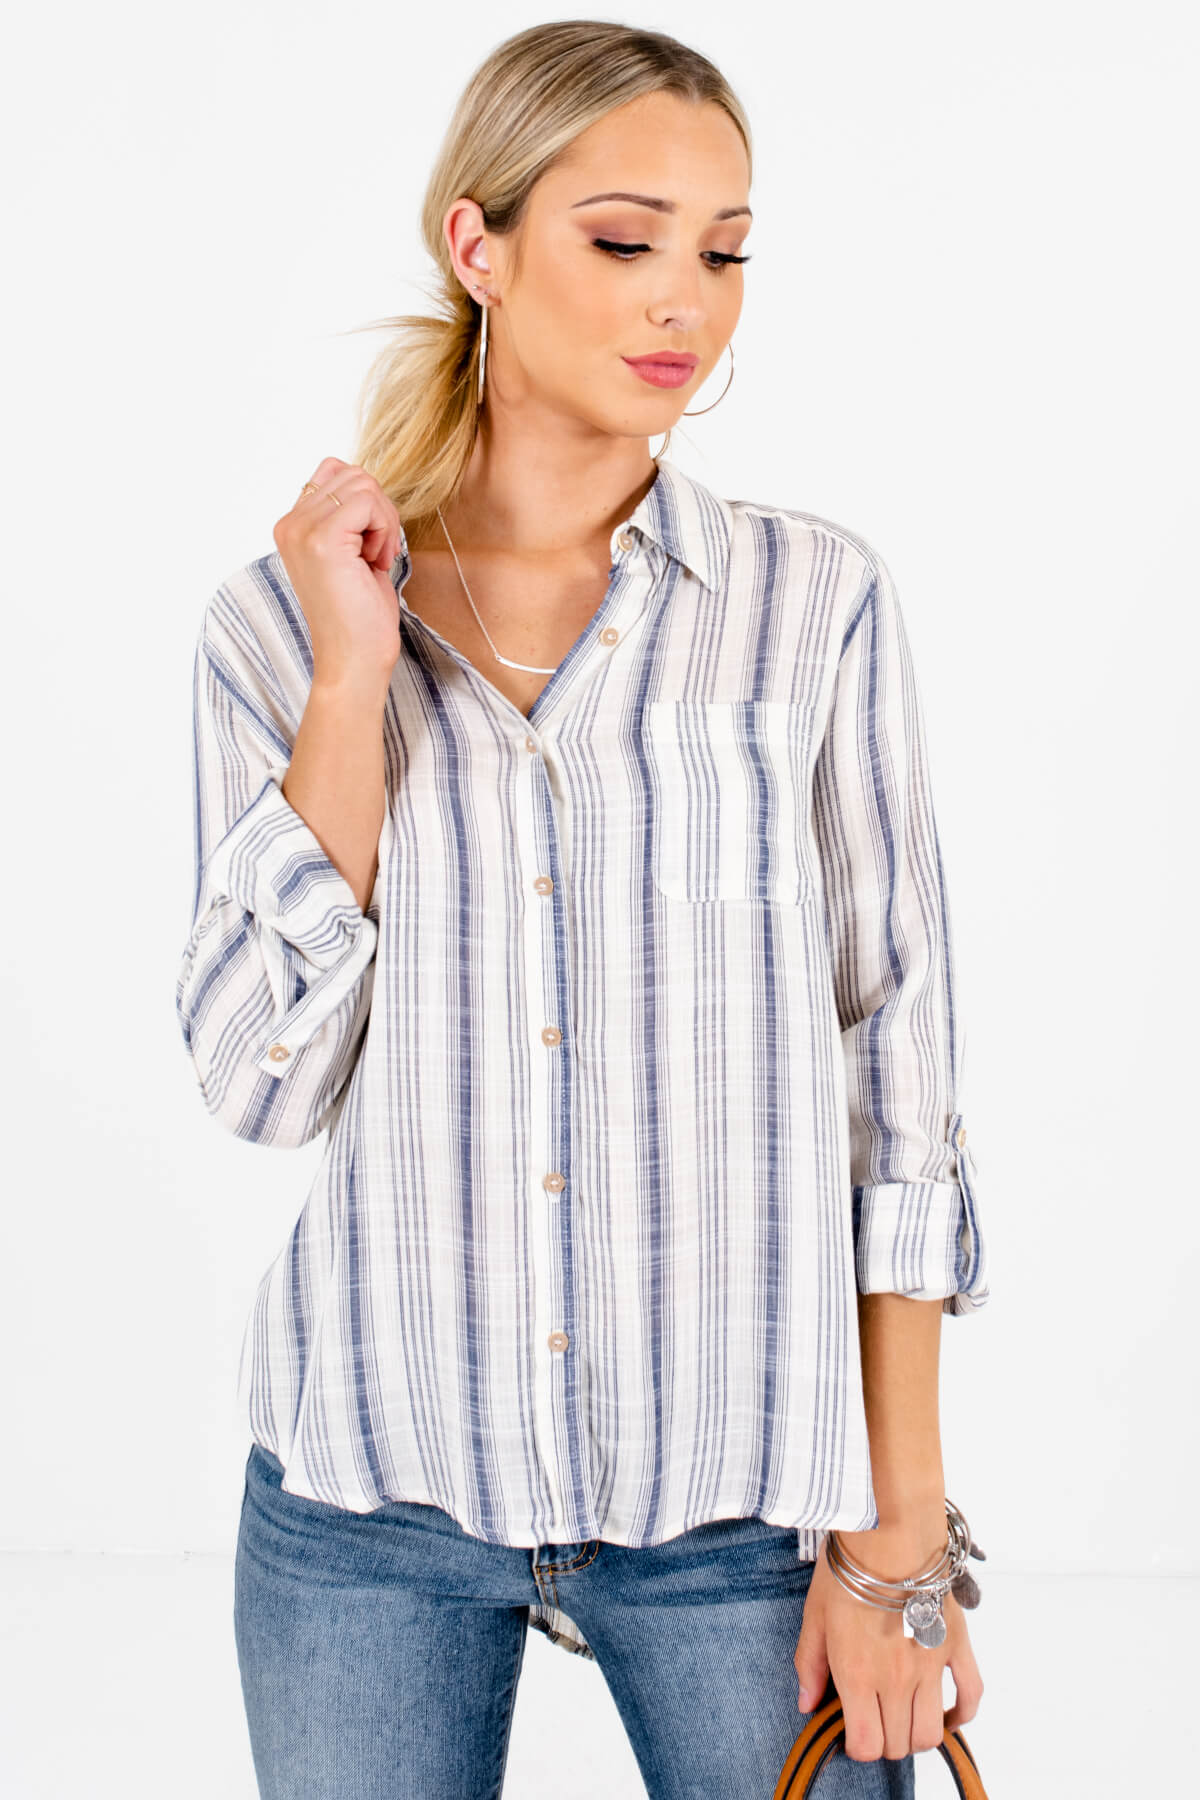 business casual striped shirt